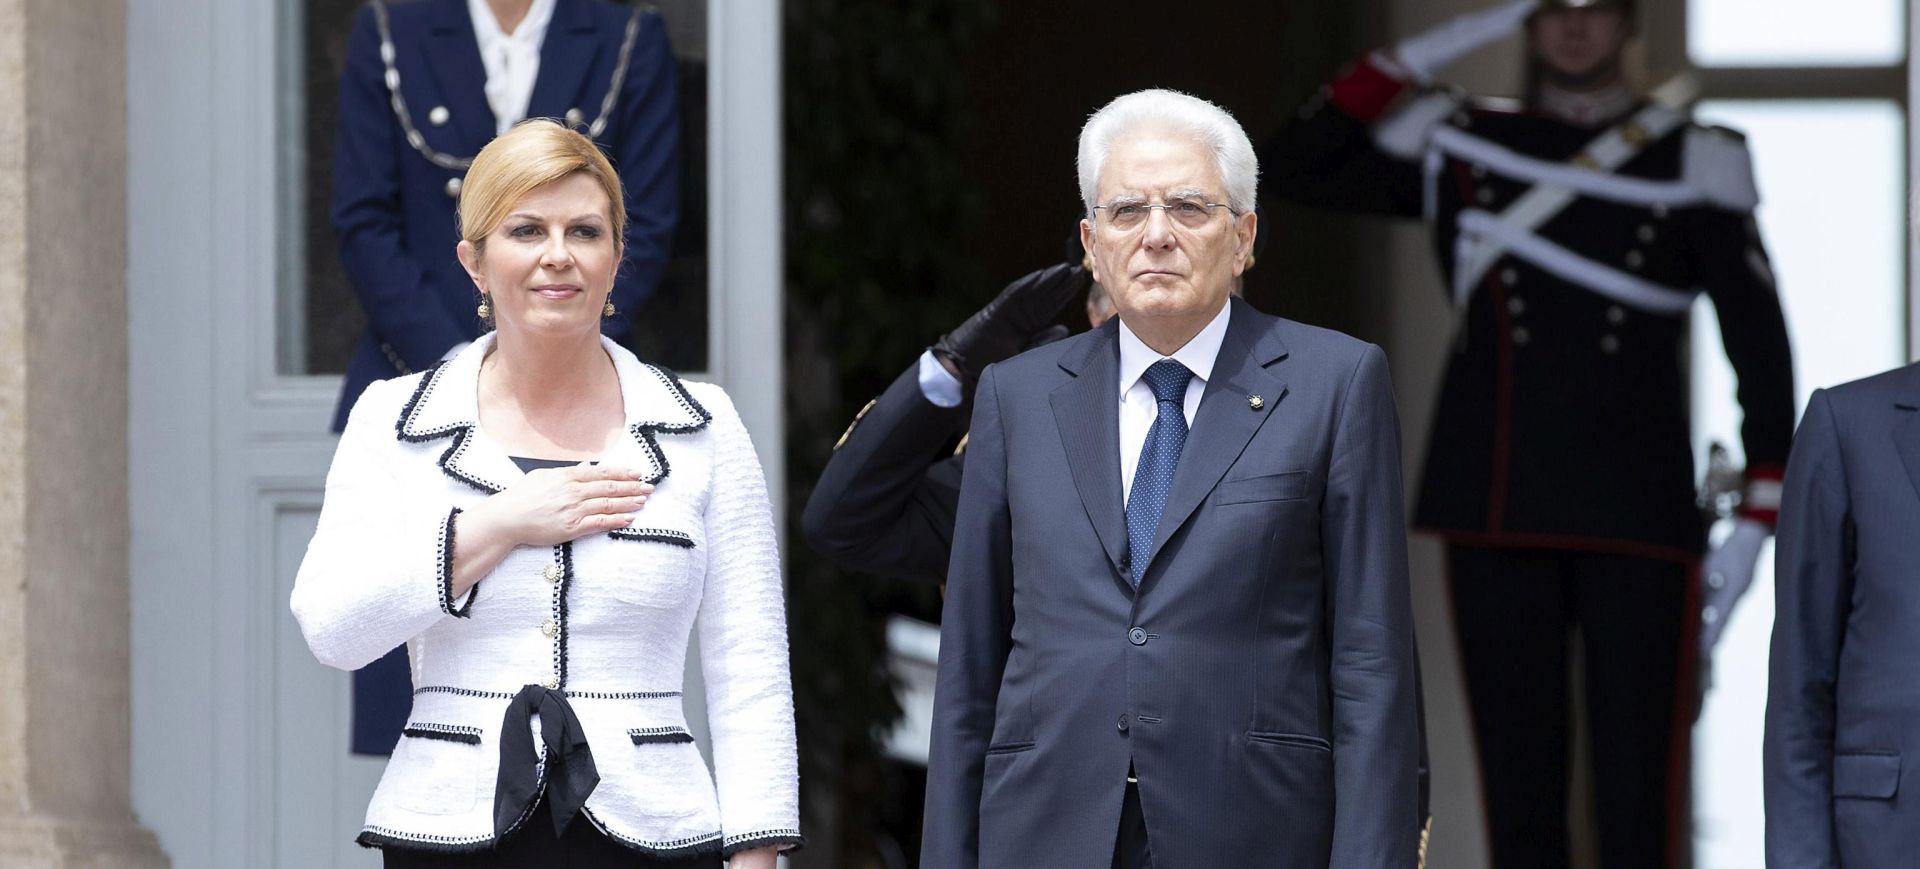 epa06771513 A handout photo made available by the Italian President's Press Office shows Italian President Sergio Mattarella (R) welcomes Croatian President Kolinda Grabar-Kitarovic (L) for a meeting at Quirinale Palace in Rome, Italy, 29 May 2018.  EPA/QUIRINALE PRESS OFFICE/PAOLO GIANDOTTI / HANDOUT  HANDOUT EDITORIAL USE ONLY/NO SALES